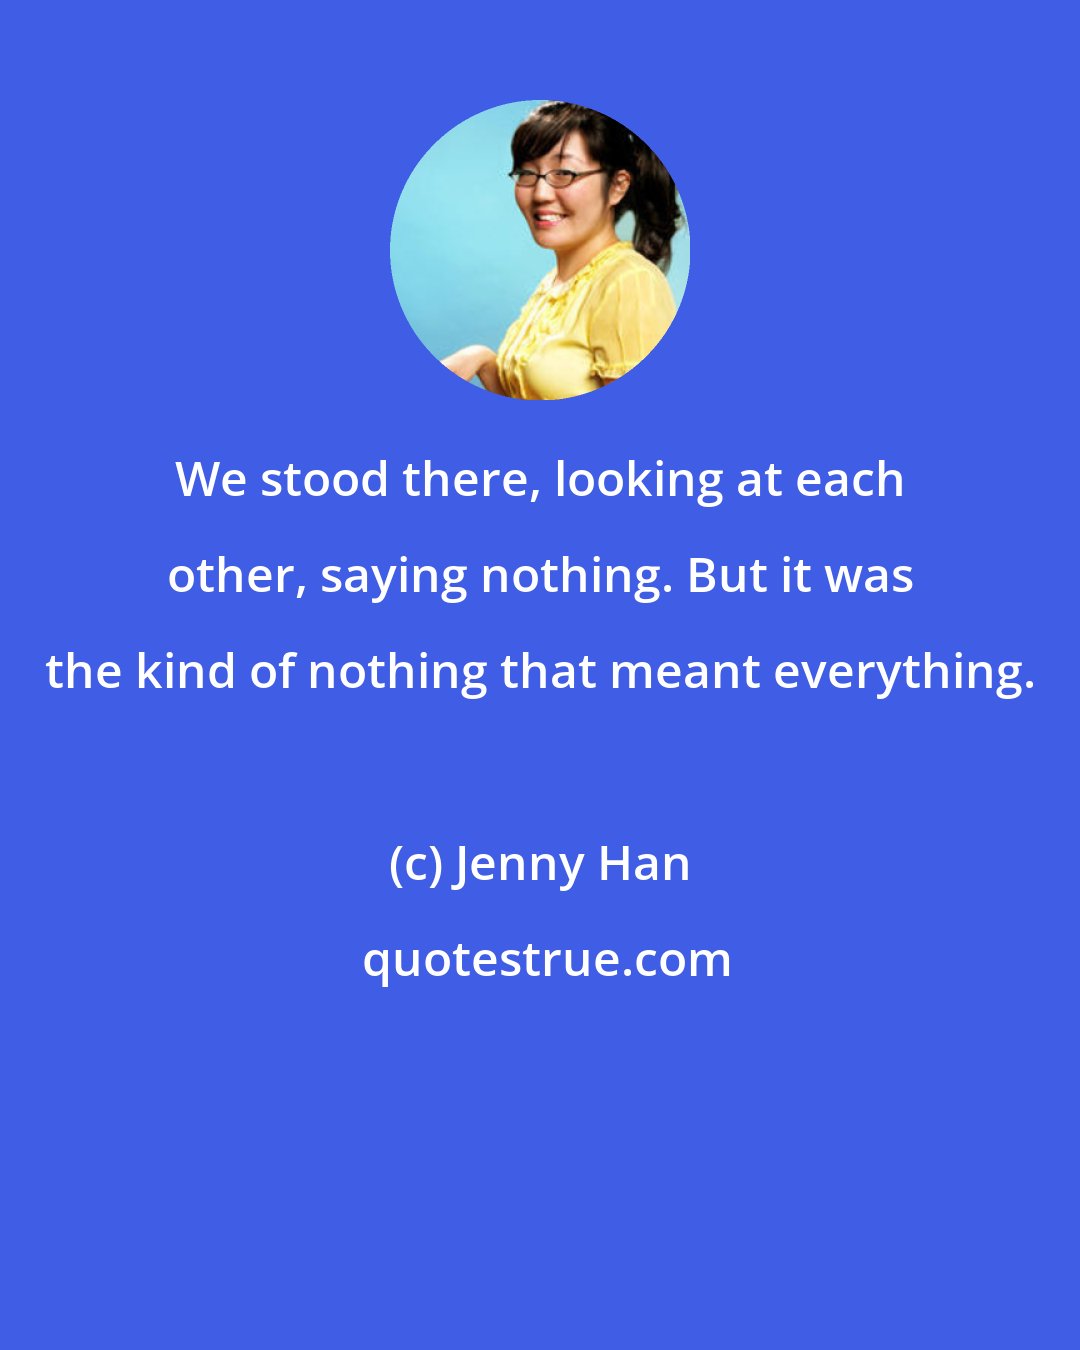 Jenny Han: We stood there, looking at each other, saying nothing. But it was the kind of nothing that meant everything.